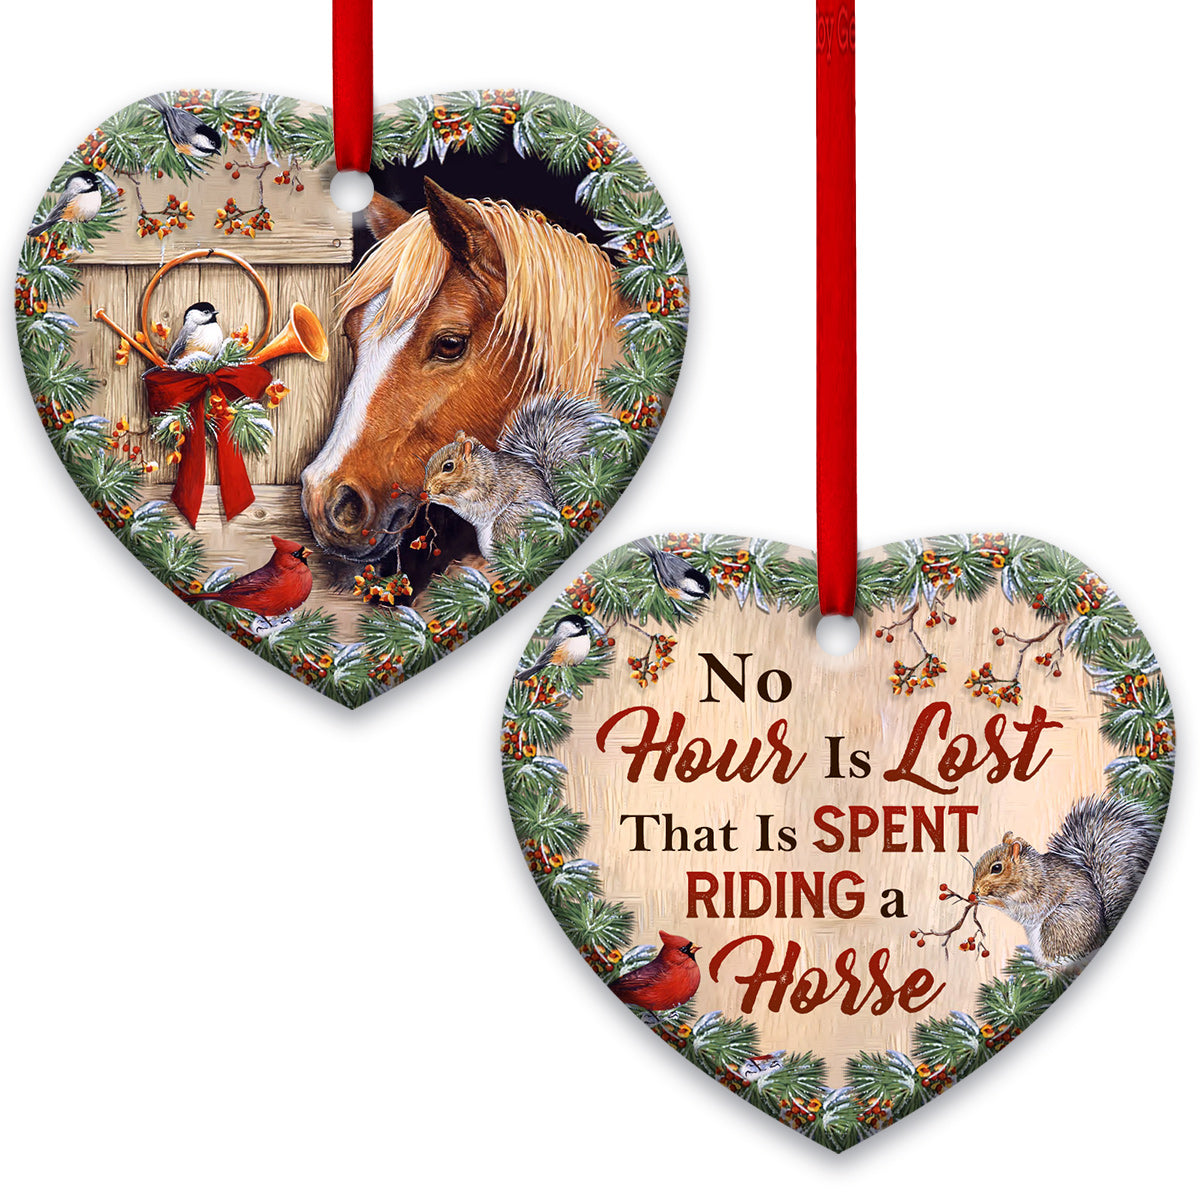 Pack 1 Horse No Hour Is Lost That Is Spent Riding A Horse - Heart Ornament - Owls Matrix LTD